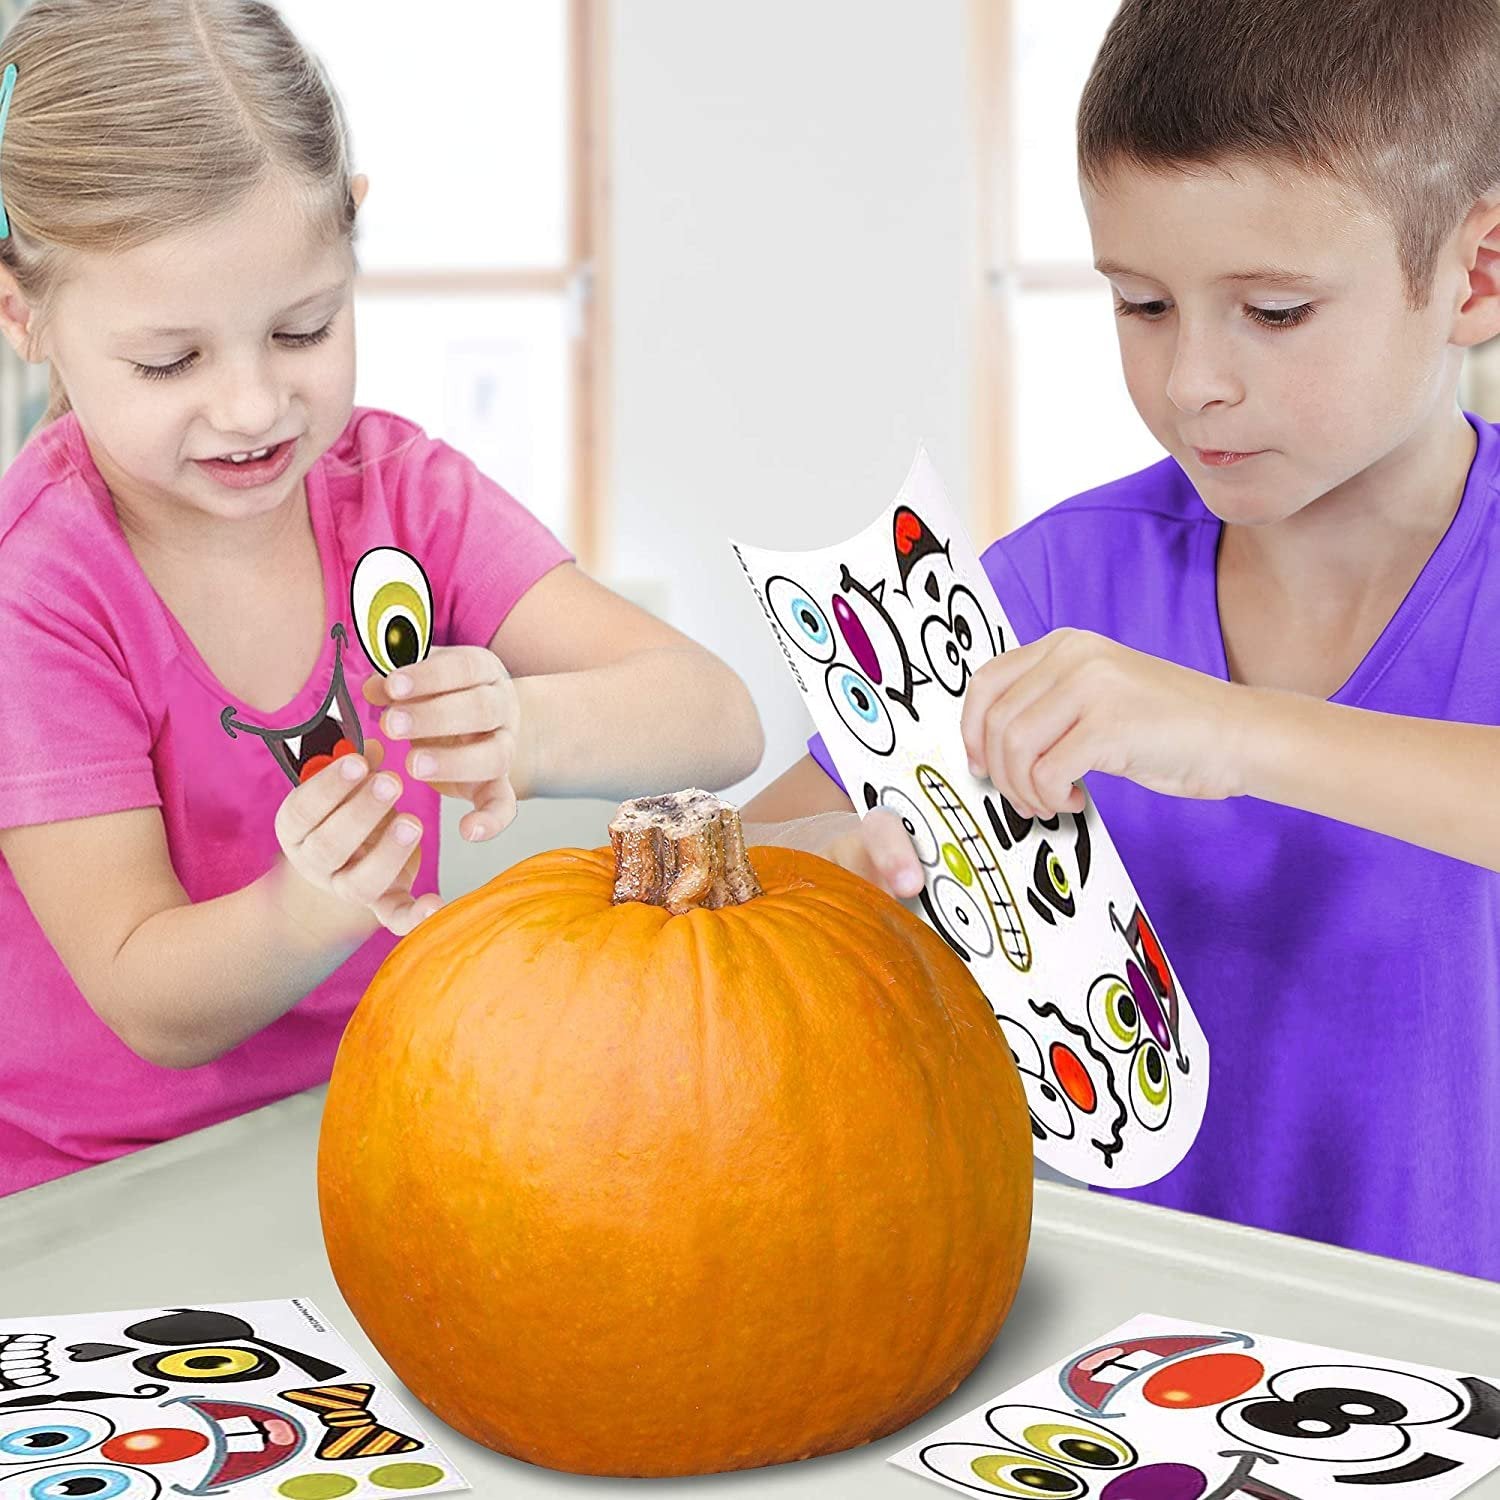 Halloween Pumpkin Decorating Stickers - 12 Large Sheets - Jack-o-Lantern Decoration Kit - 26 Total Face Stickers - Cute Halloween Decor Idea - Treats, Gifts, and Crafts for Kids- 6" x 9"